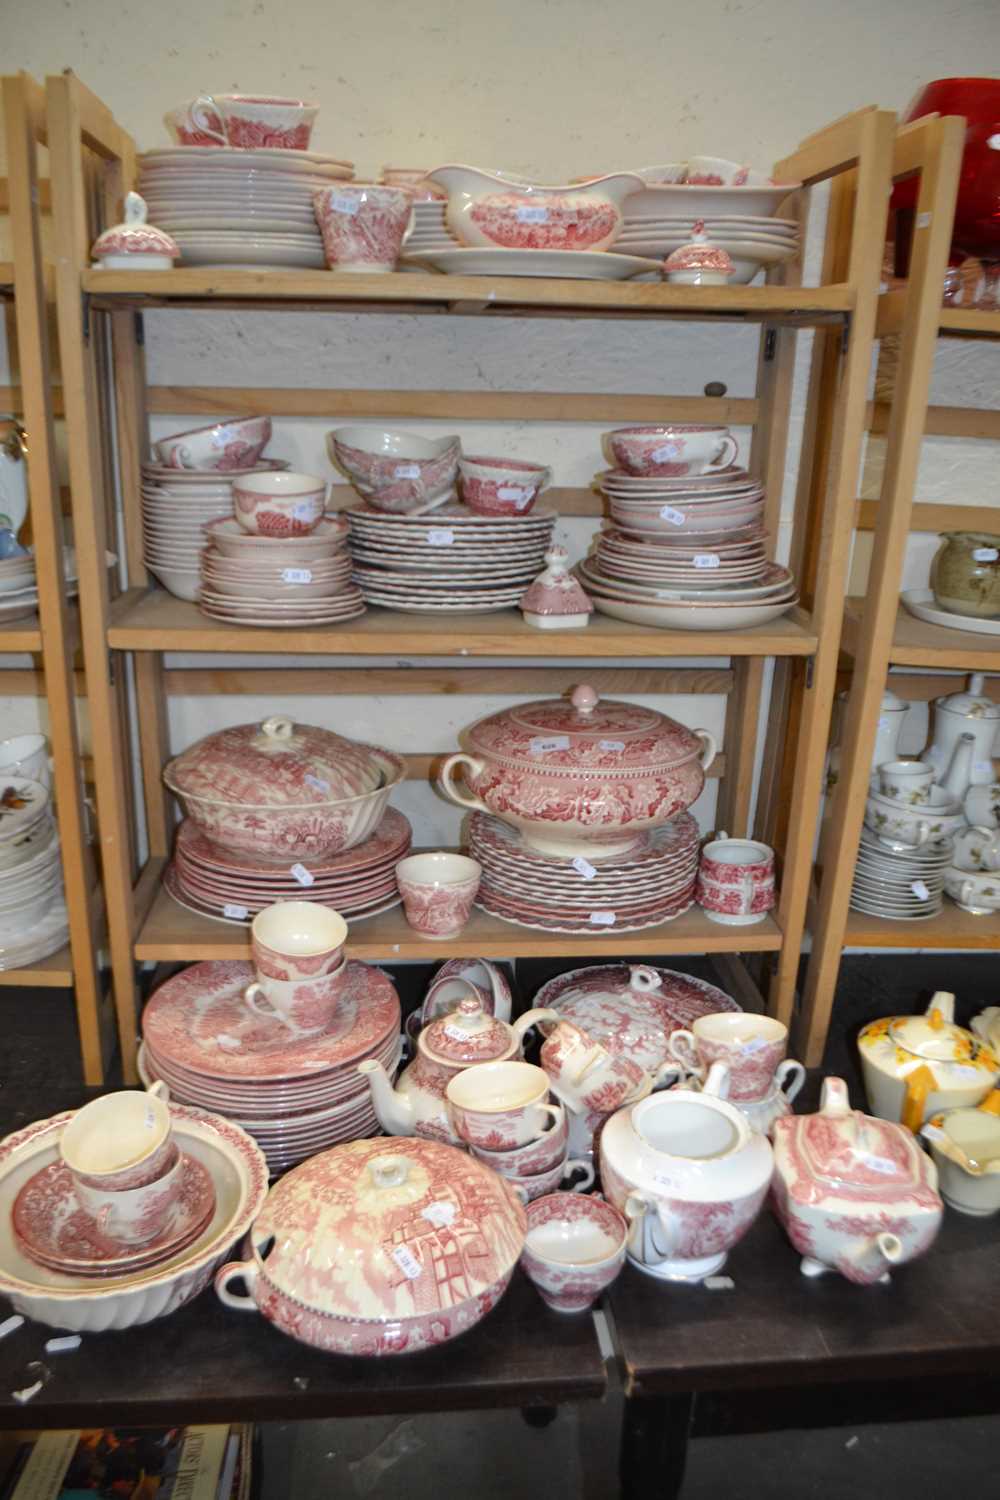 Large quantity of Castles stone ware table wares and others similar